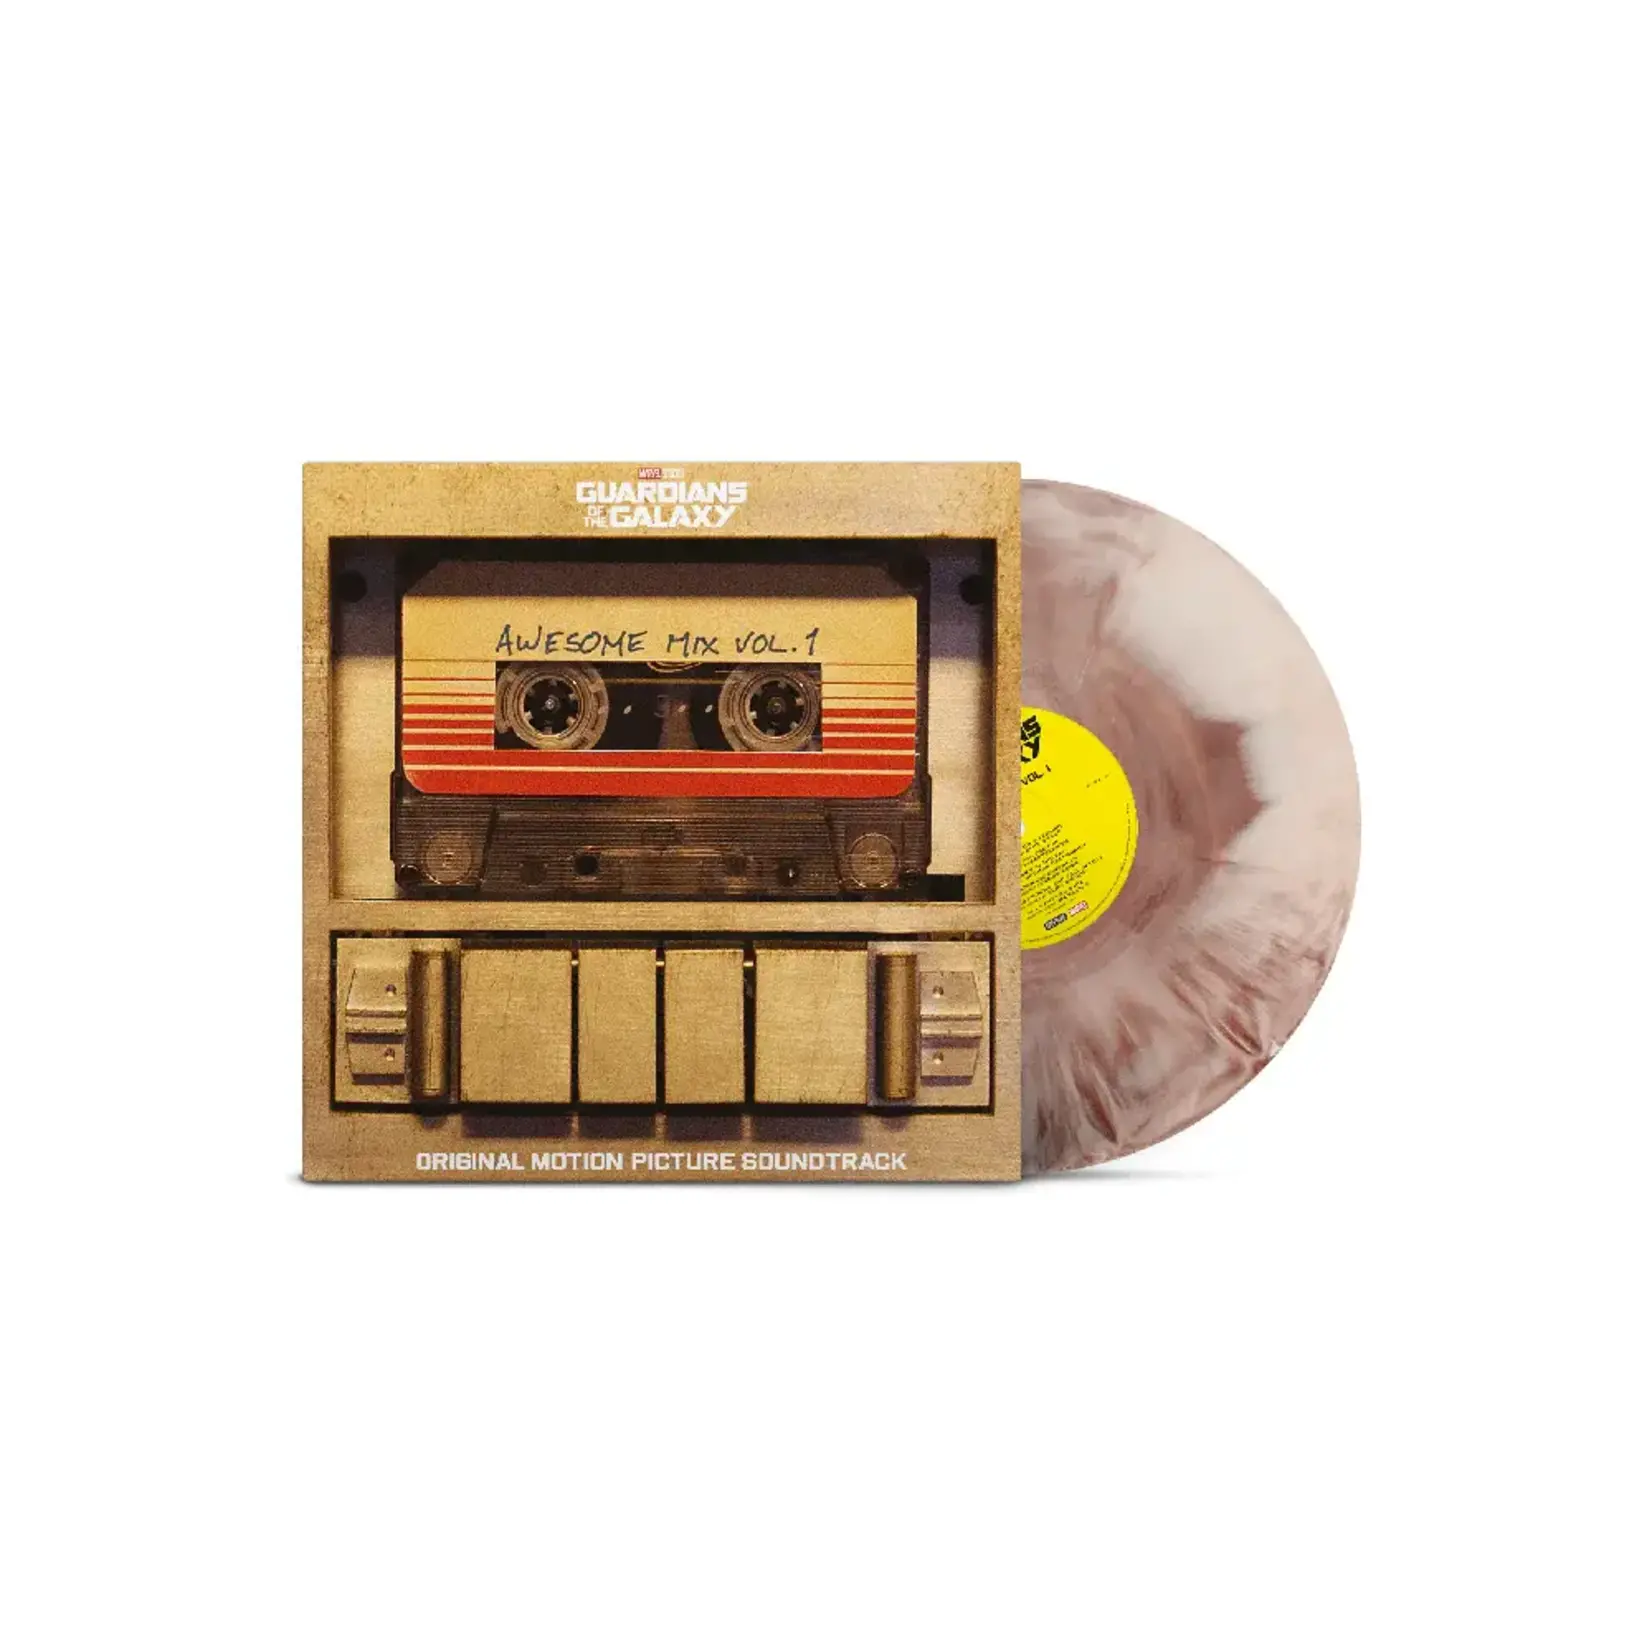 [New] Various Artists - Guardians Of The Galaxy - Awesome Mix V1 (soundtrack, cloudy storm vinyl)